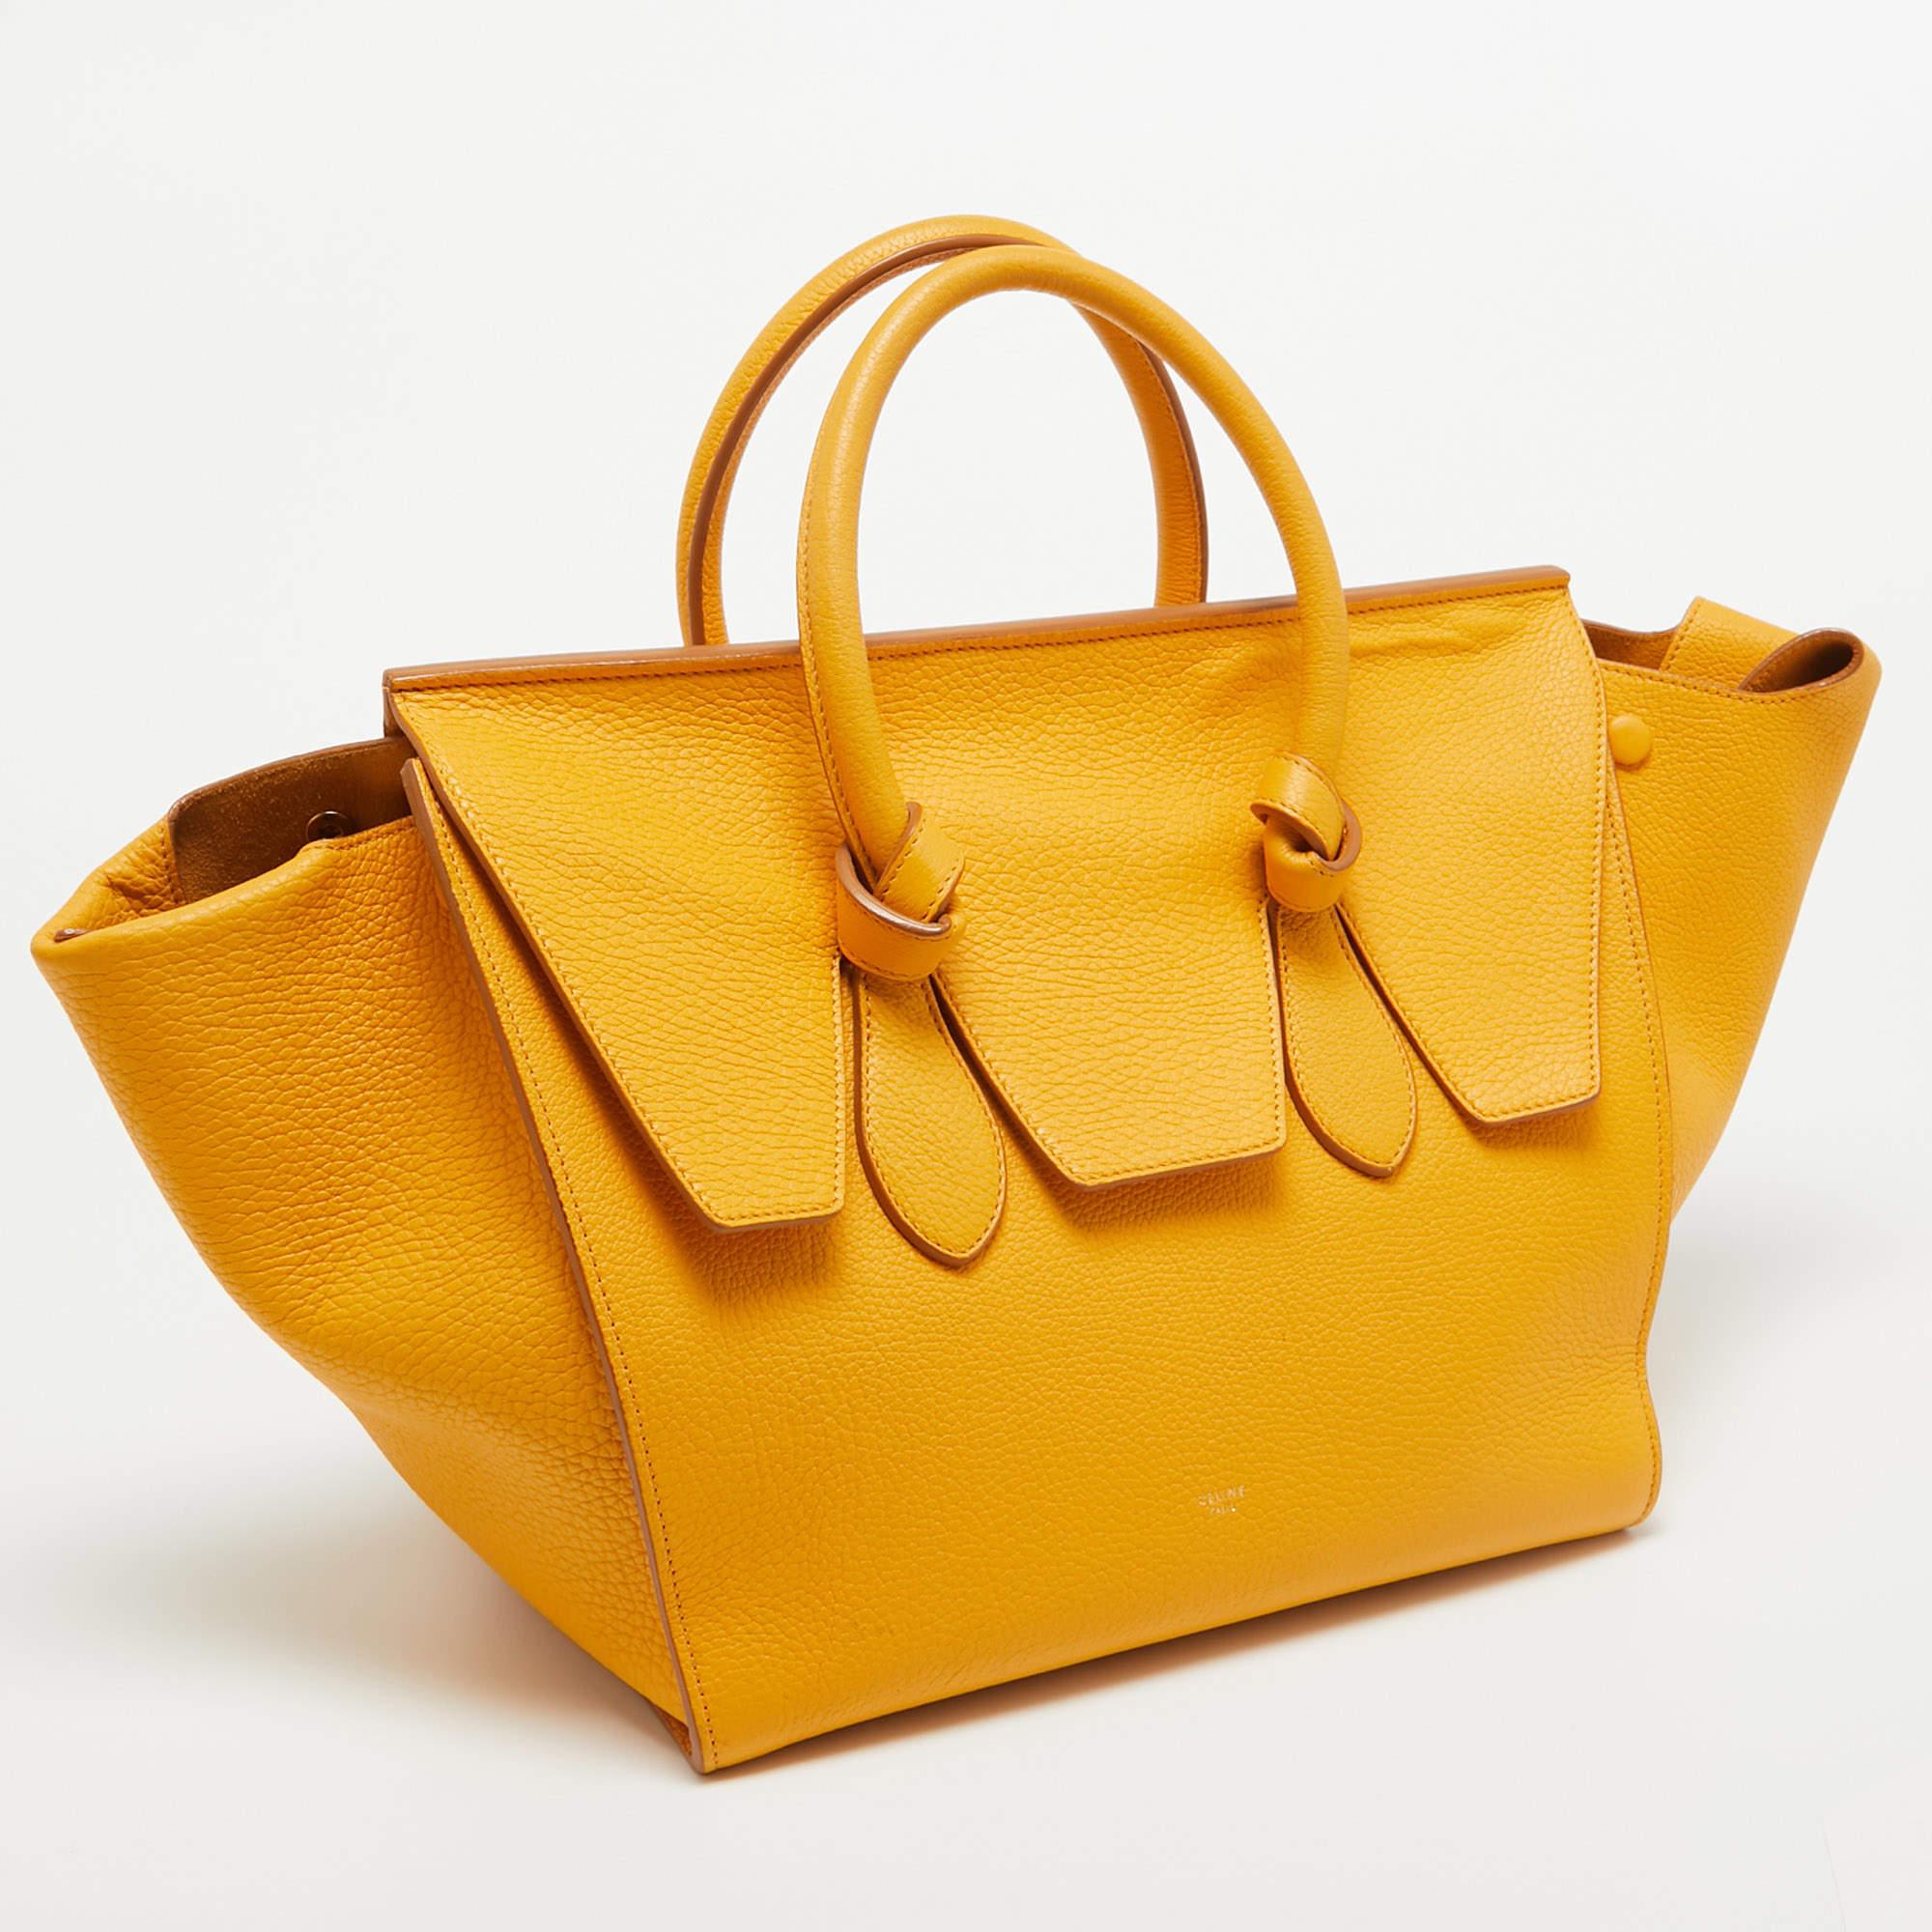 Perfect for conveniently housing your essentials in one place, this Celine tote is a worthy investment. It has notable details and offers a look of luxury.

